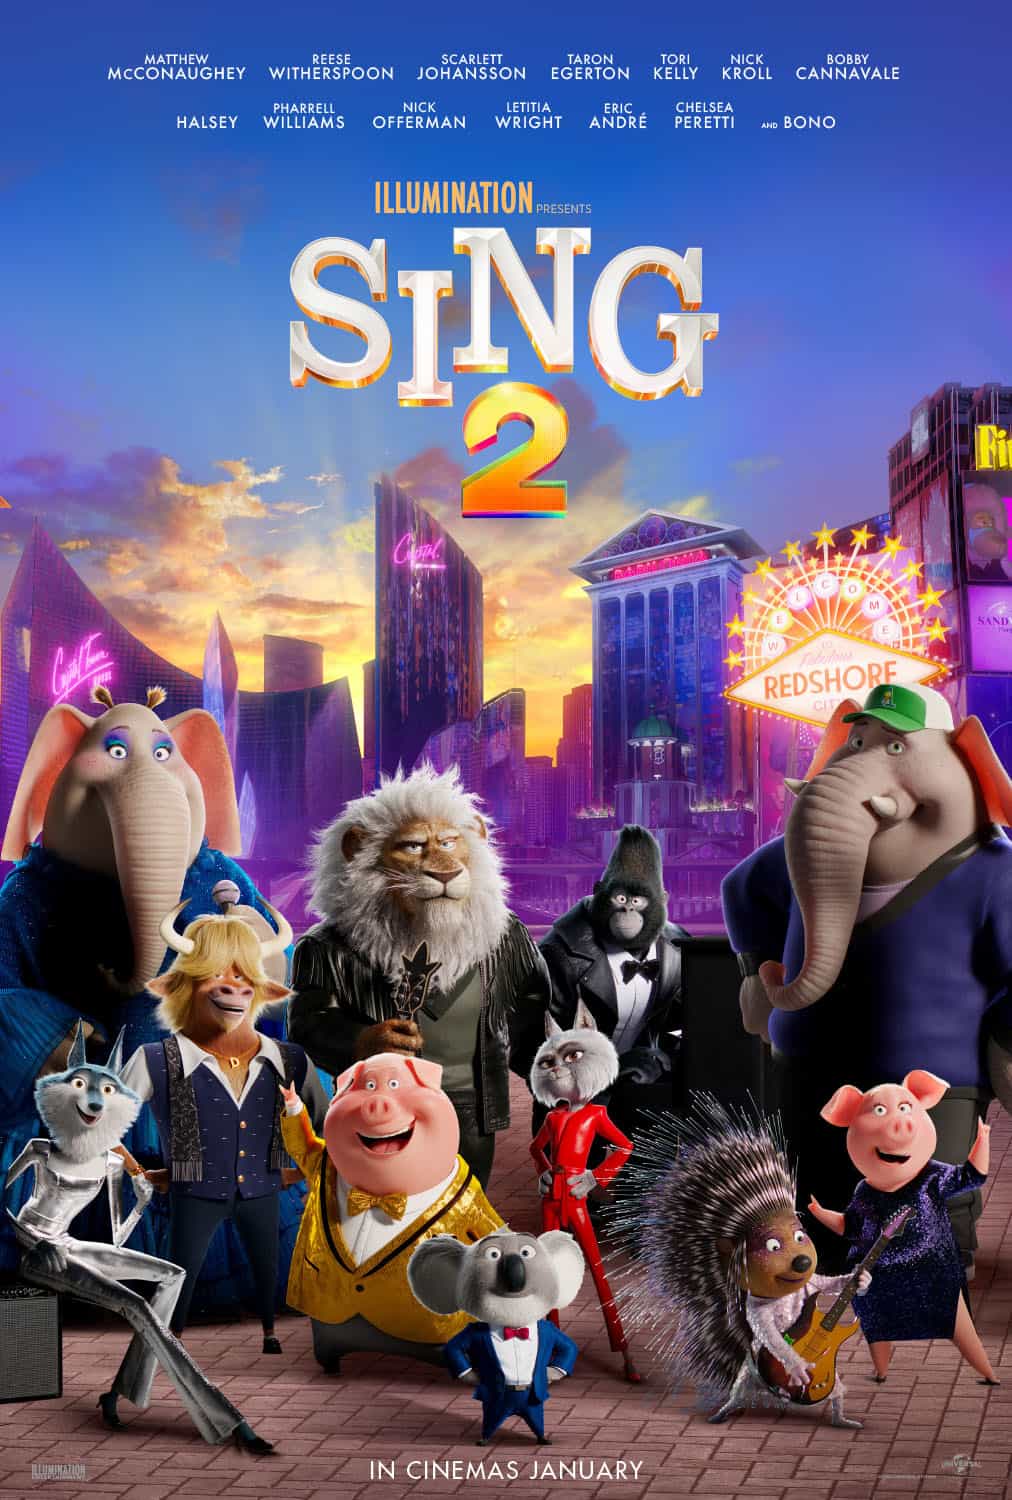 UK Box Office Weekend Report 28th - 30th January 2022:  Sing 2 ends Spider-Man 6 week run at the top of the UK box office